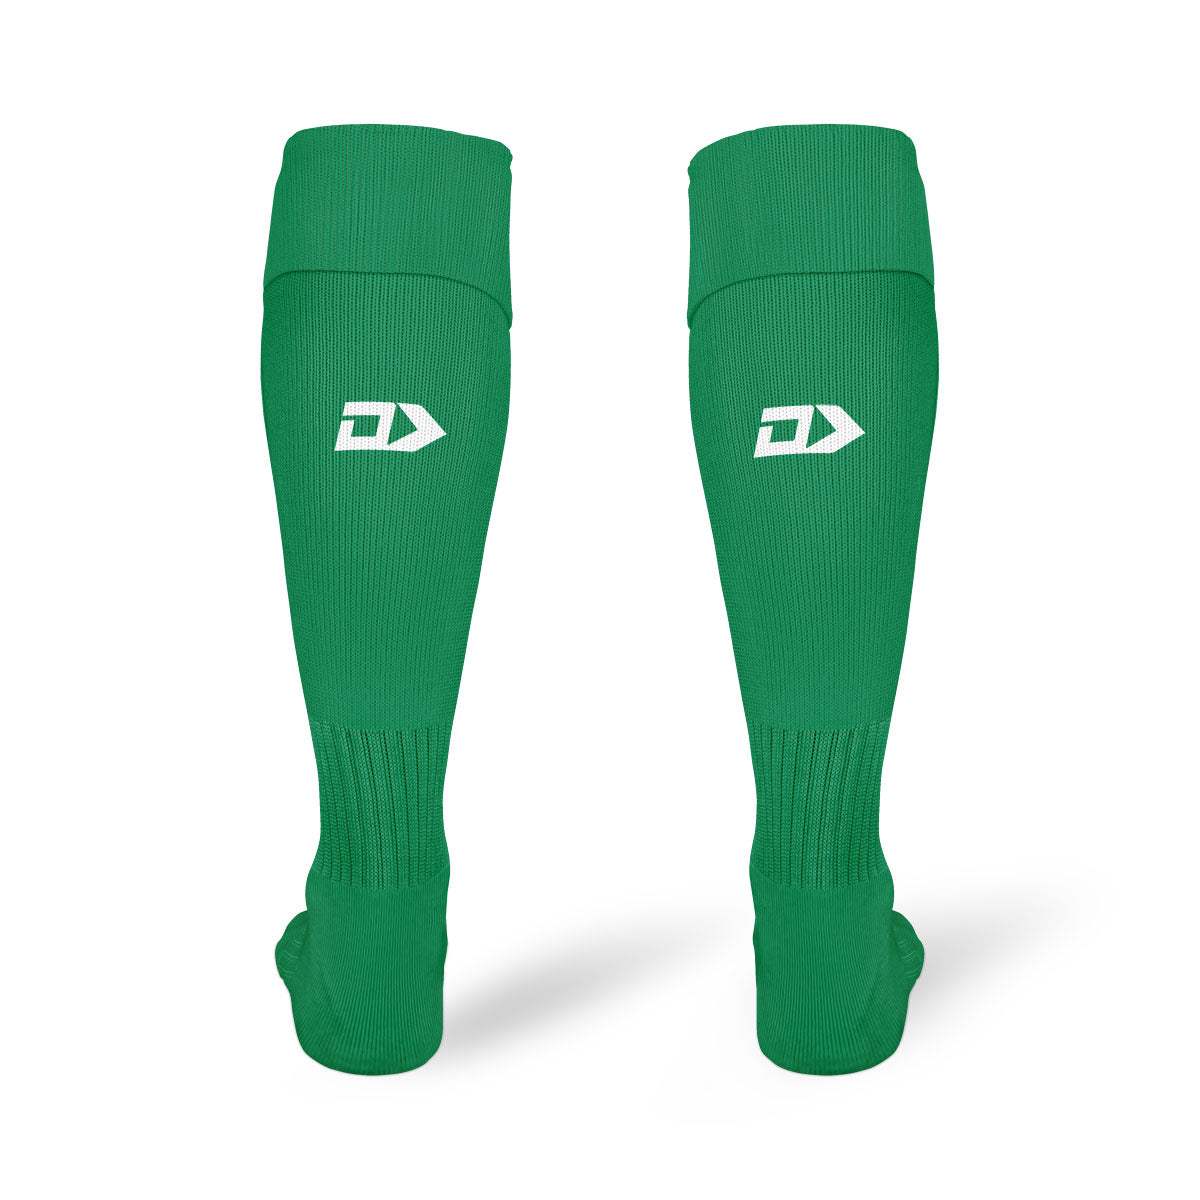 DS Emerald Turnover Sock